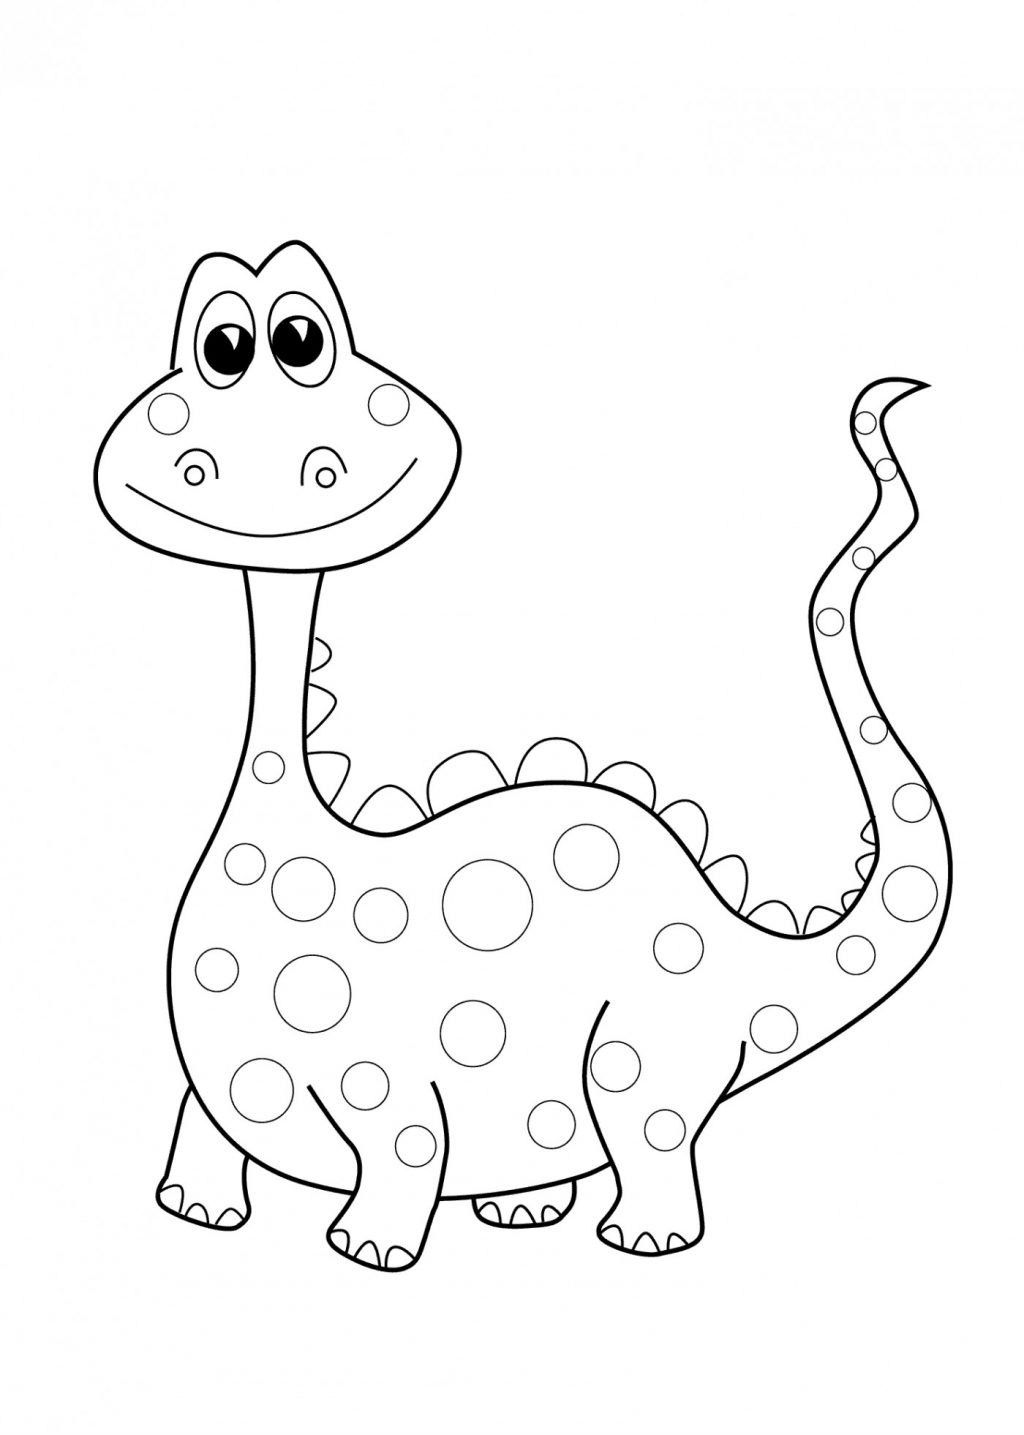 Free preschool coloring pages coloring page coloring page dinosaur pages preschool depetta free